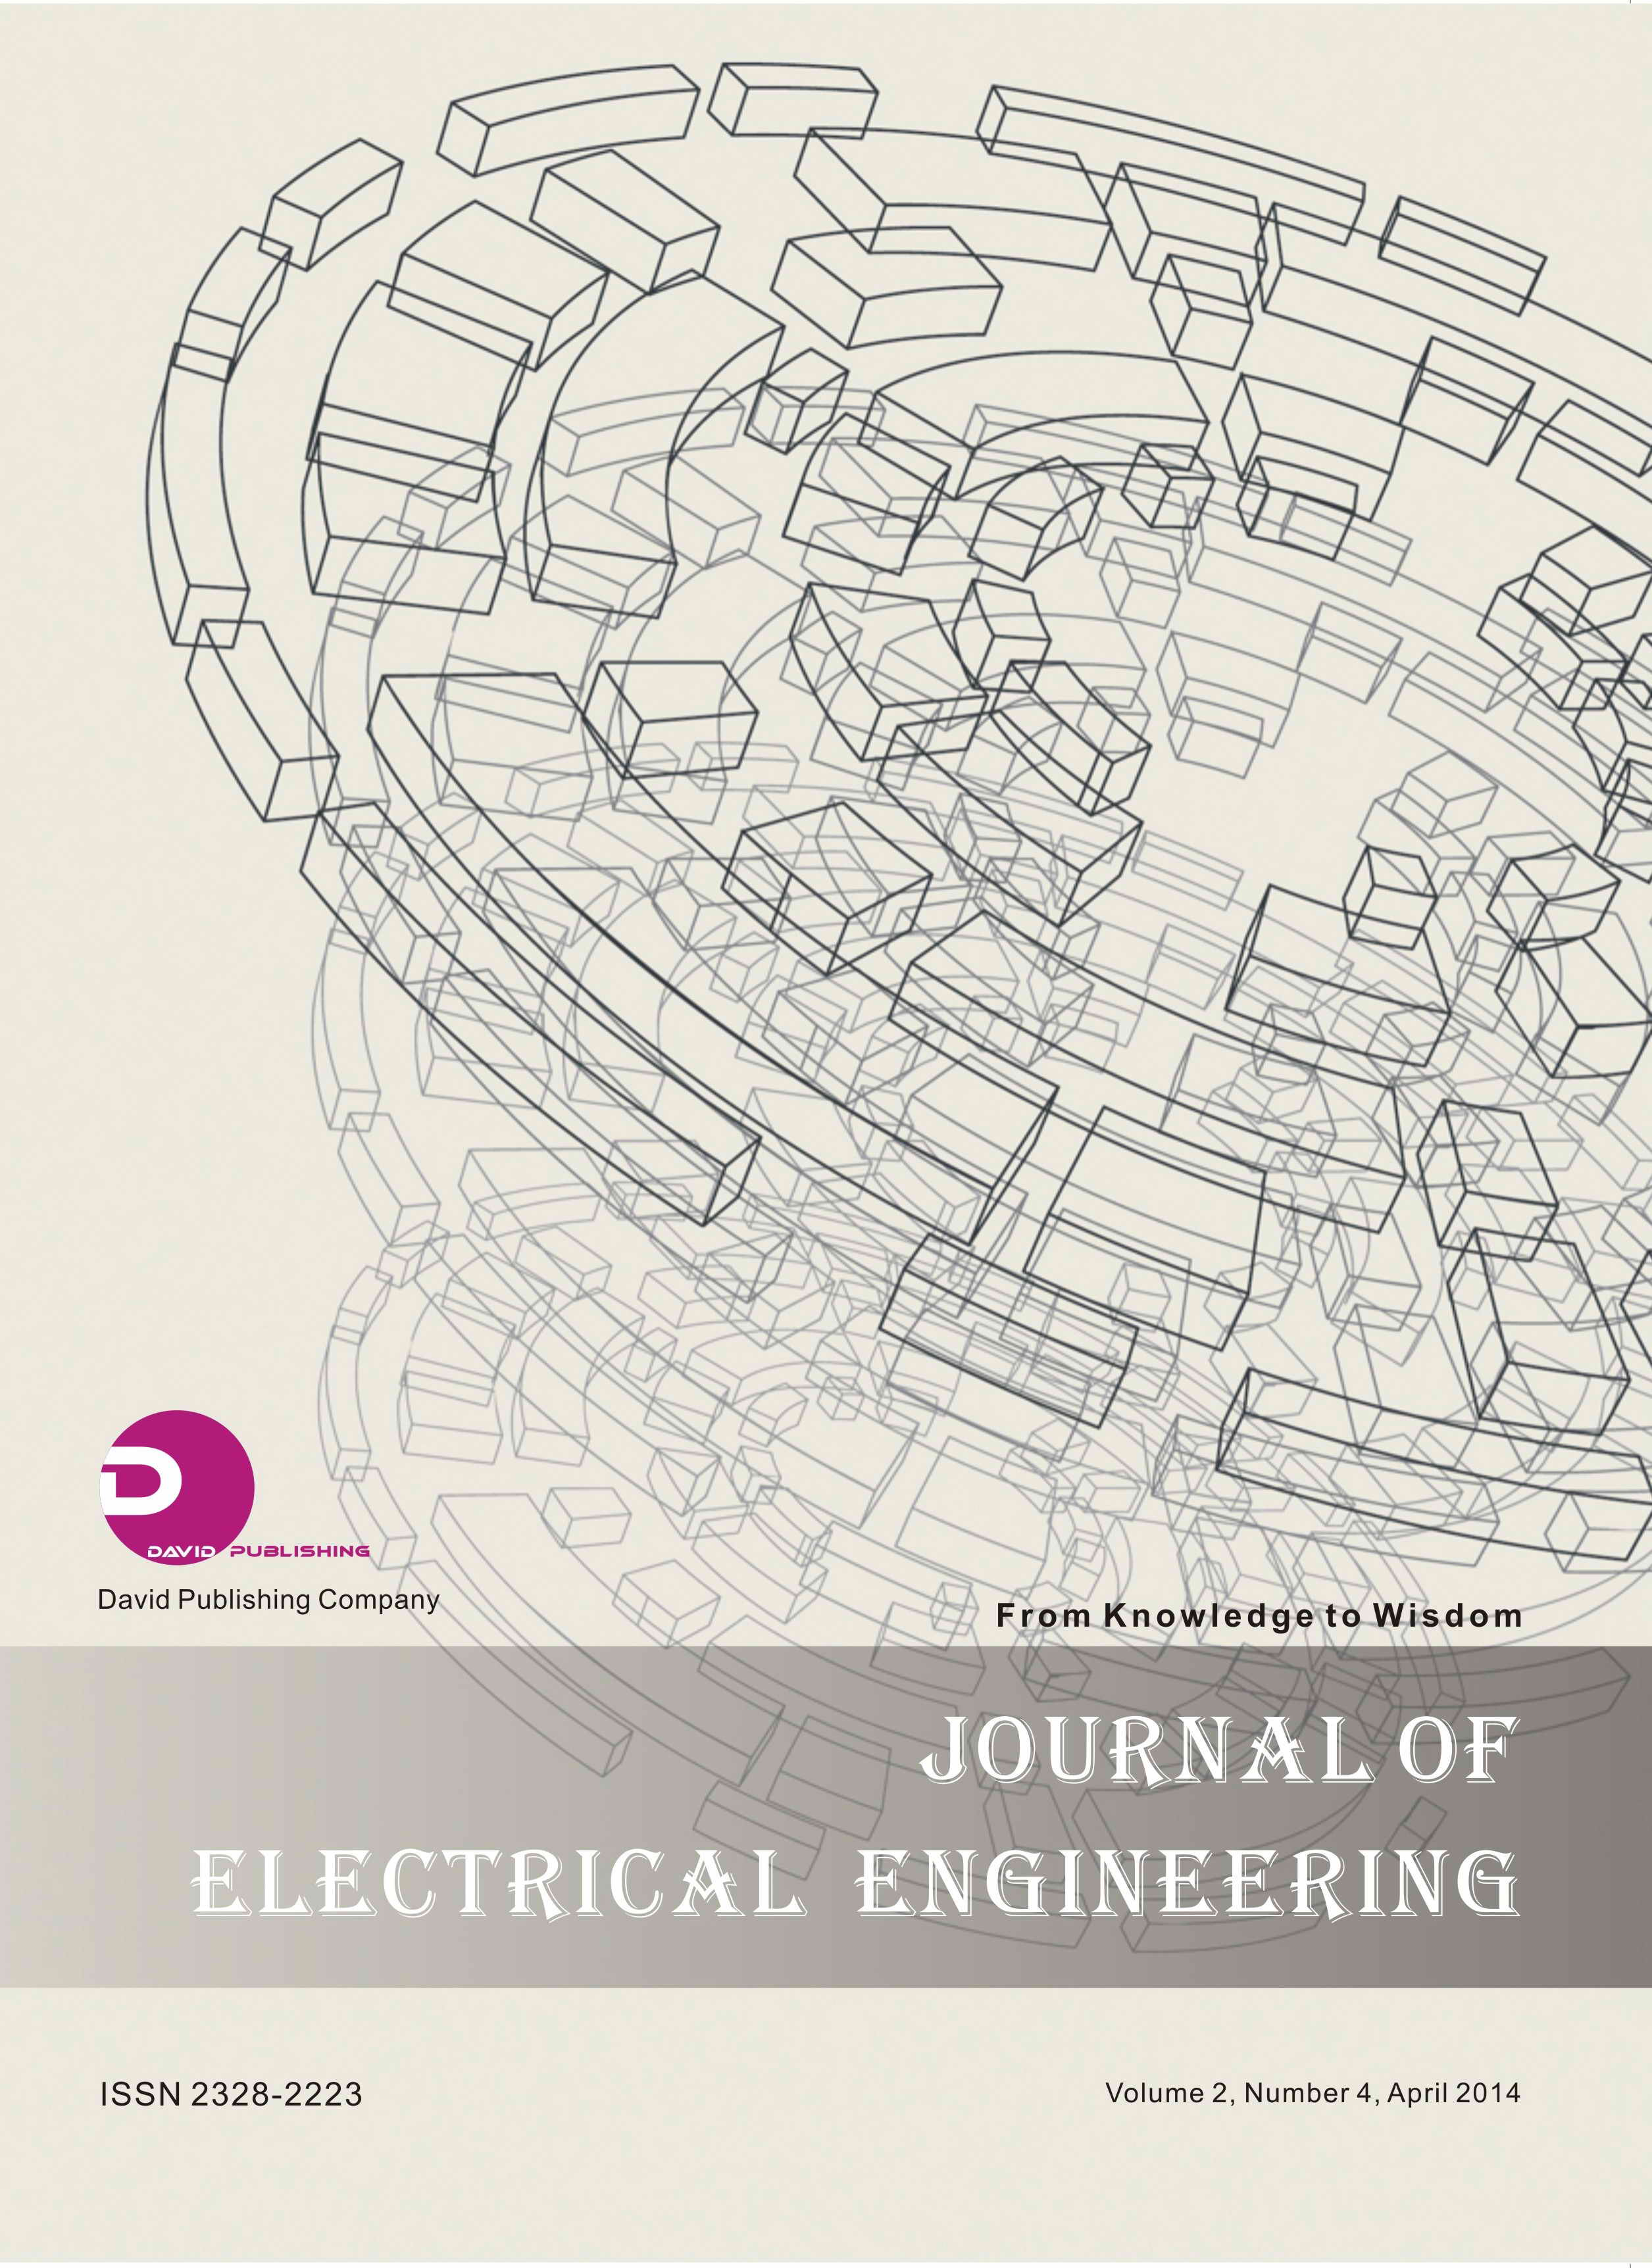 Journal of Electrical Engineering